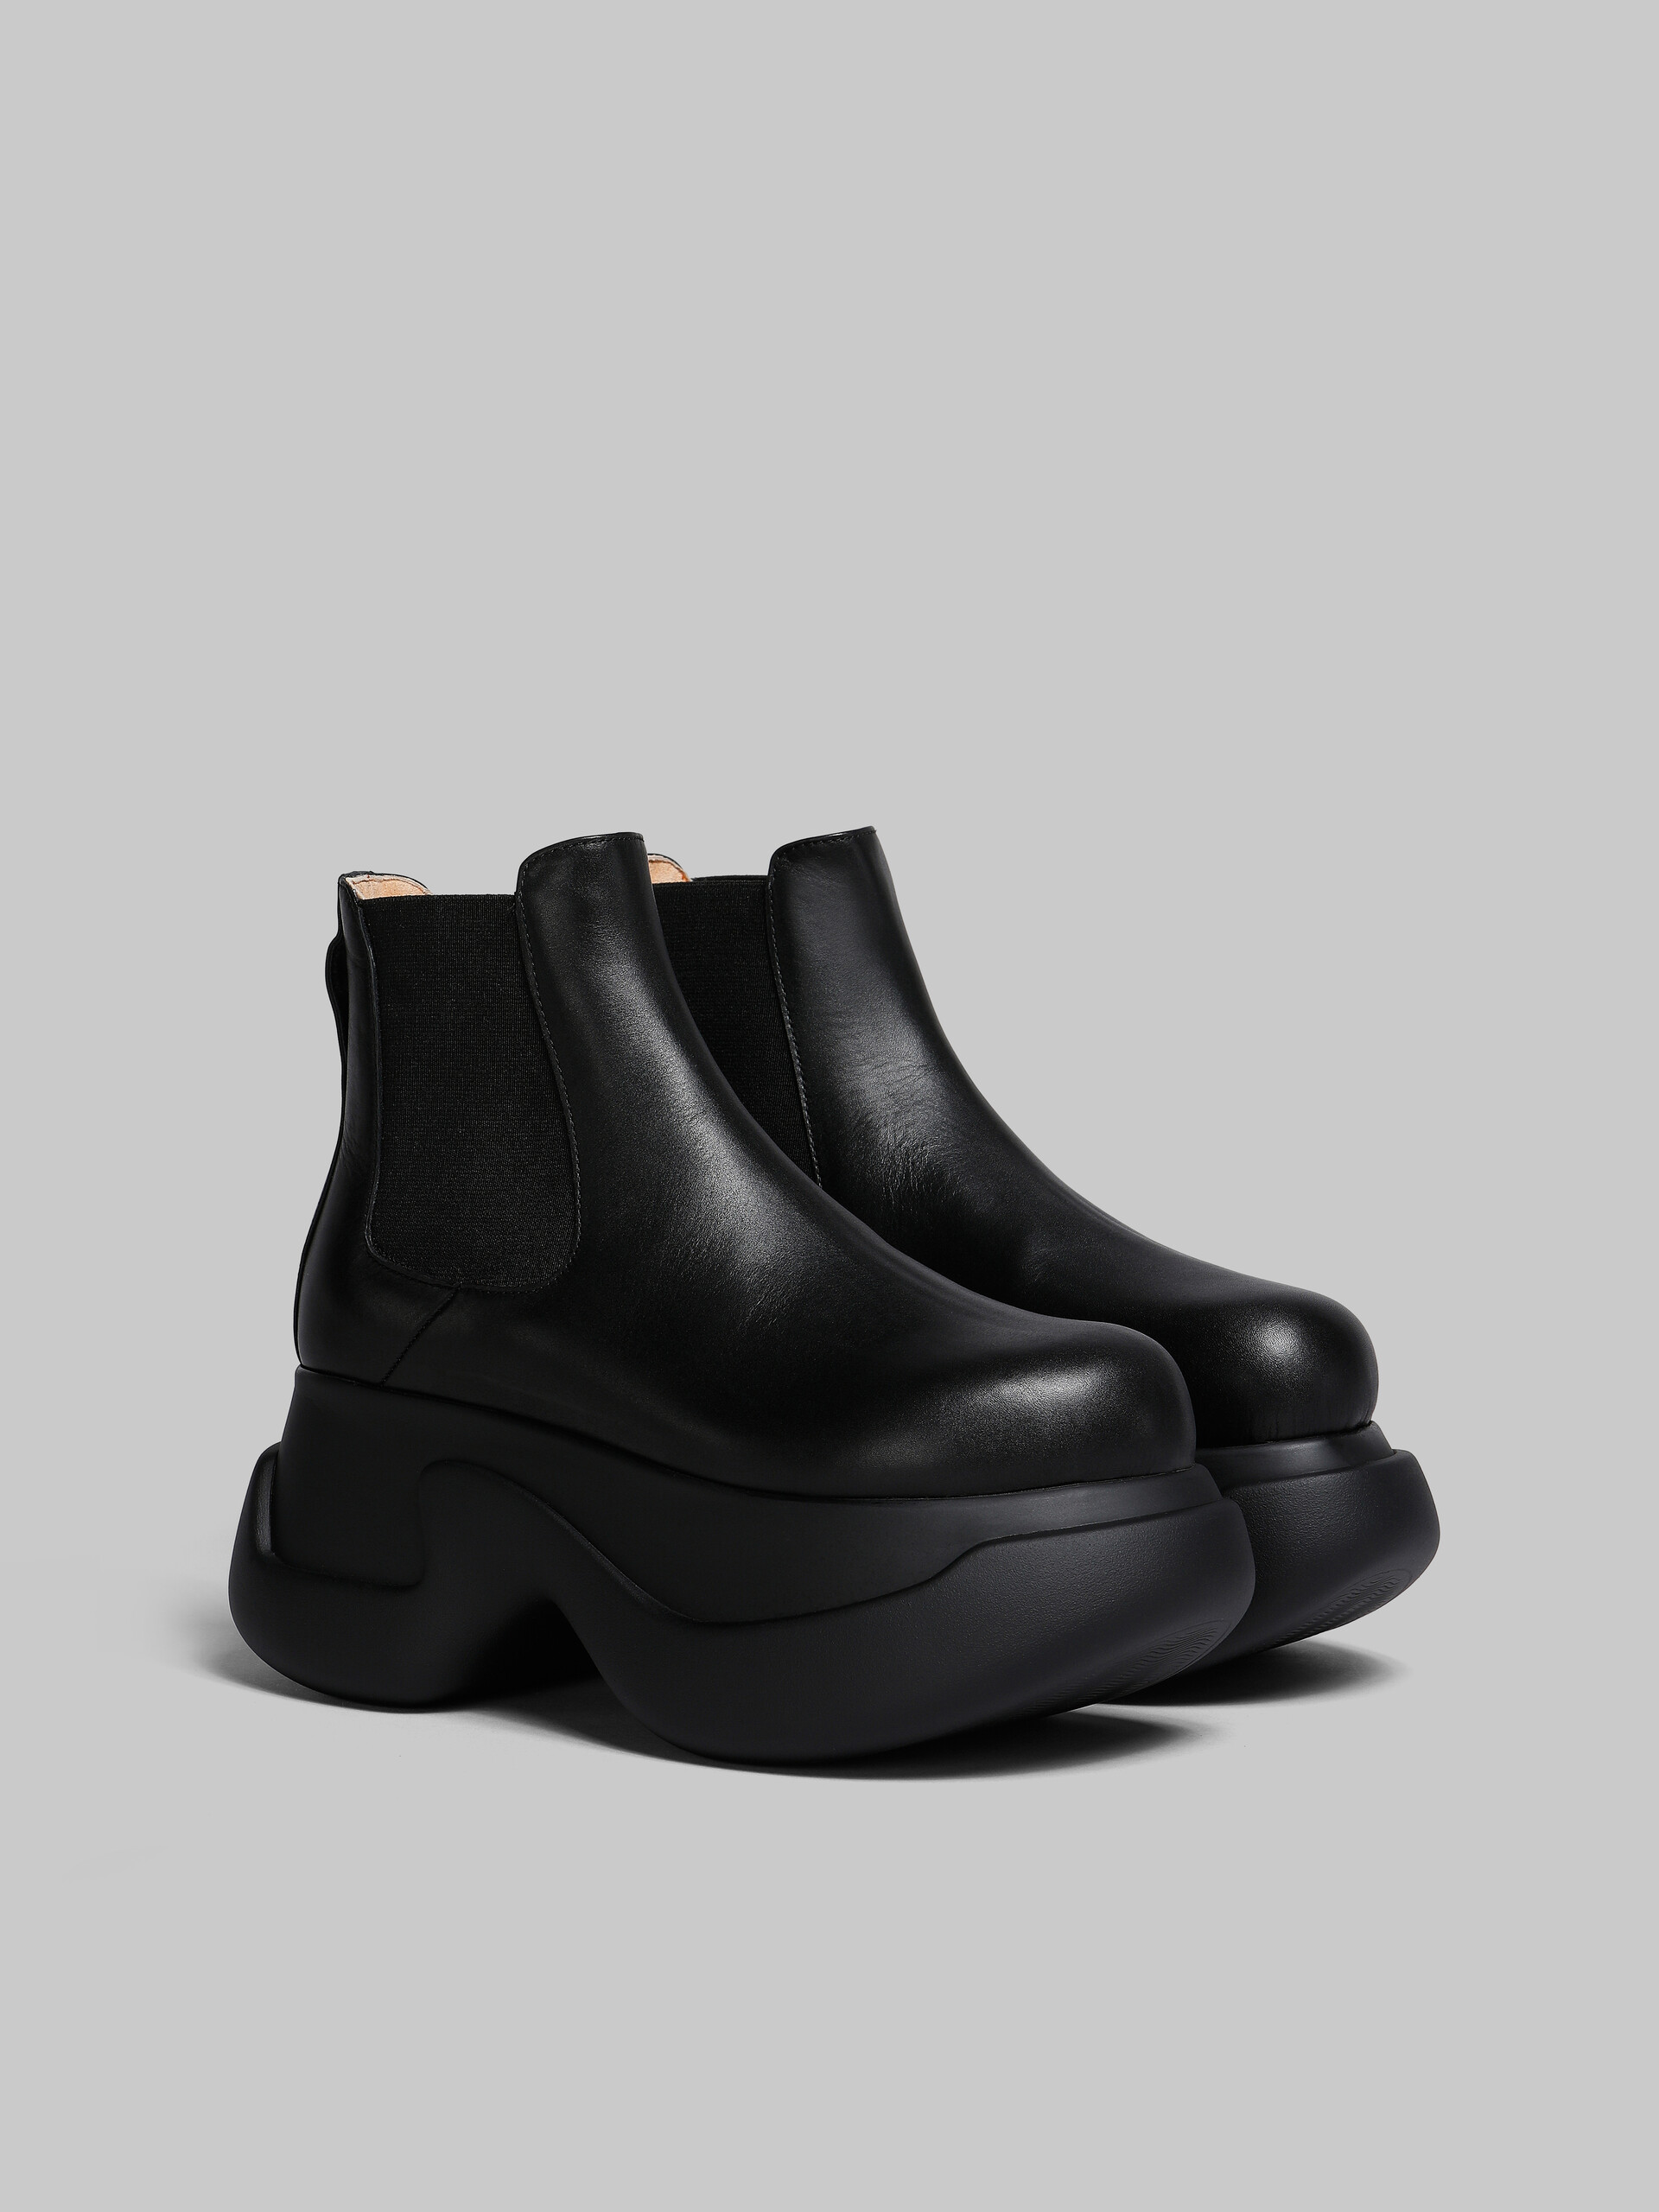 Black leather Aras 23 chelsea boot - Boots - Image 2